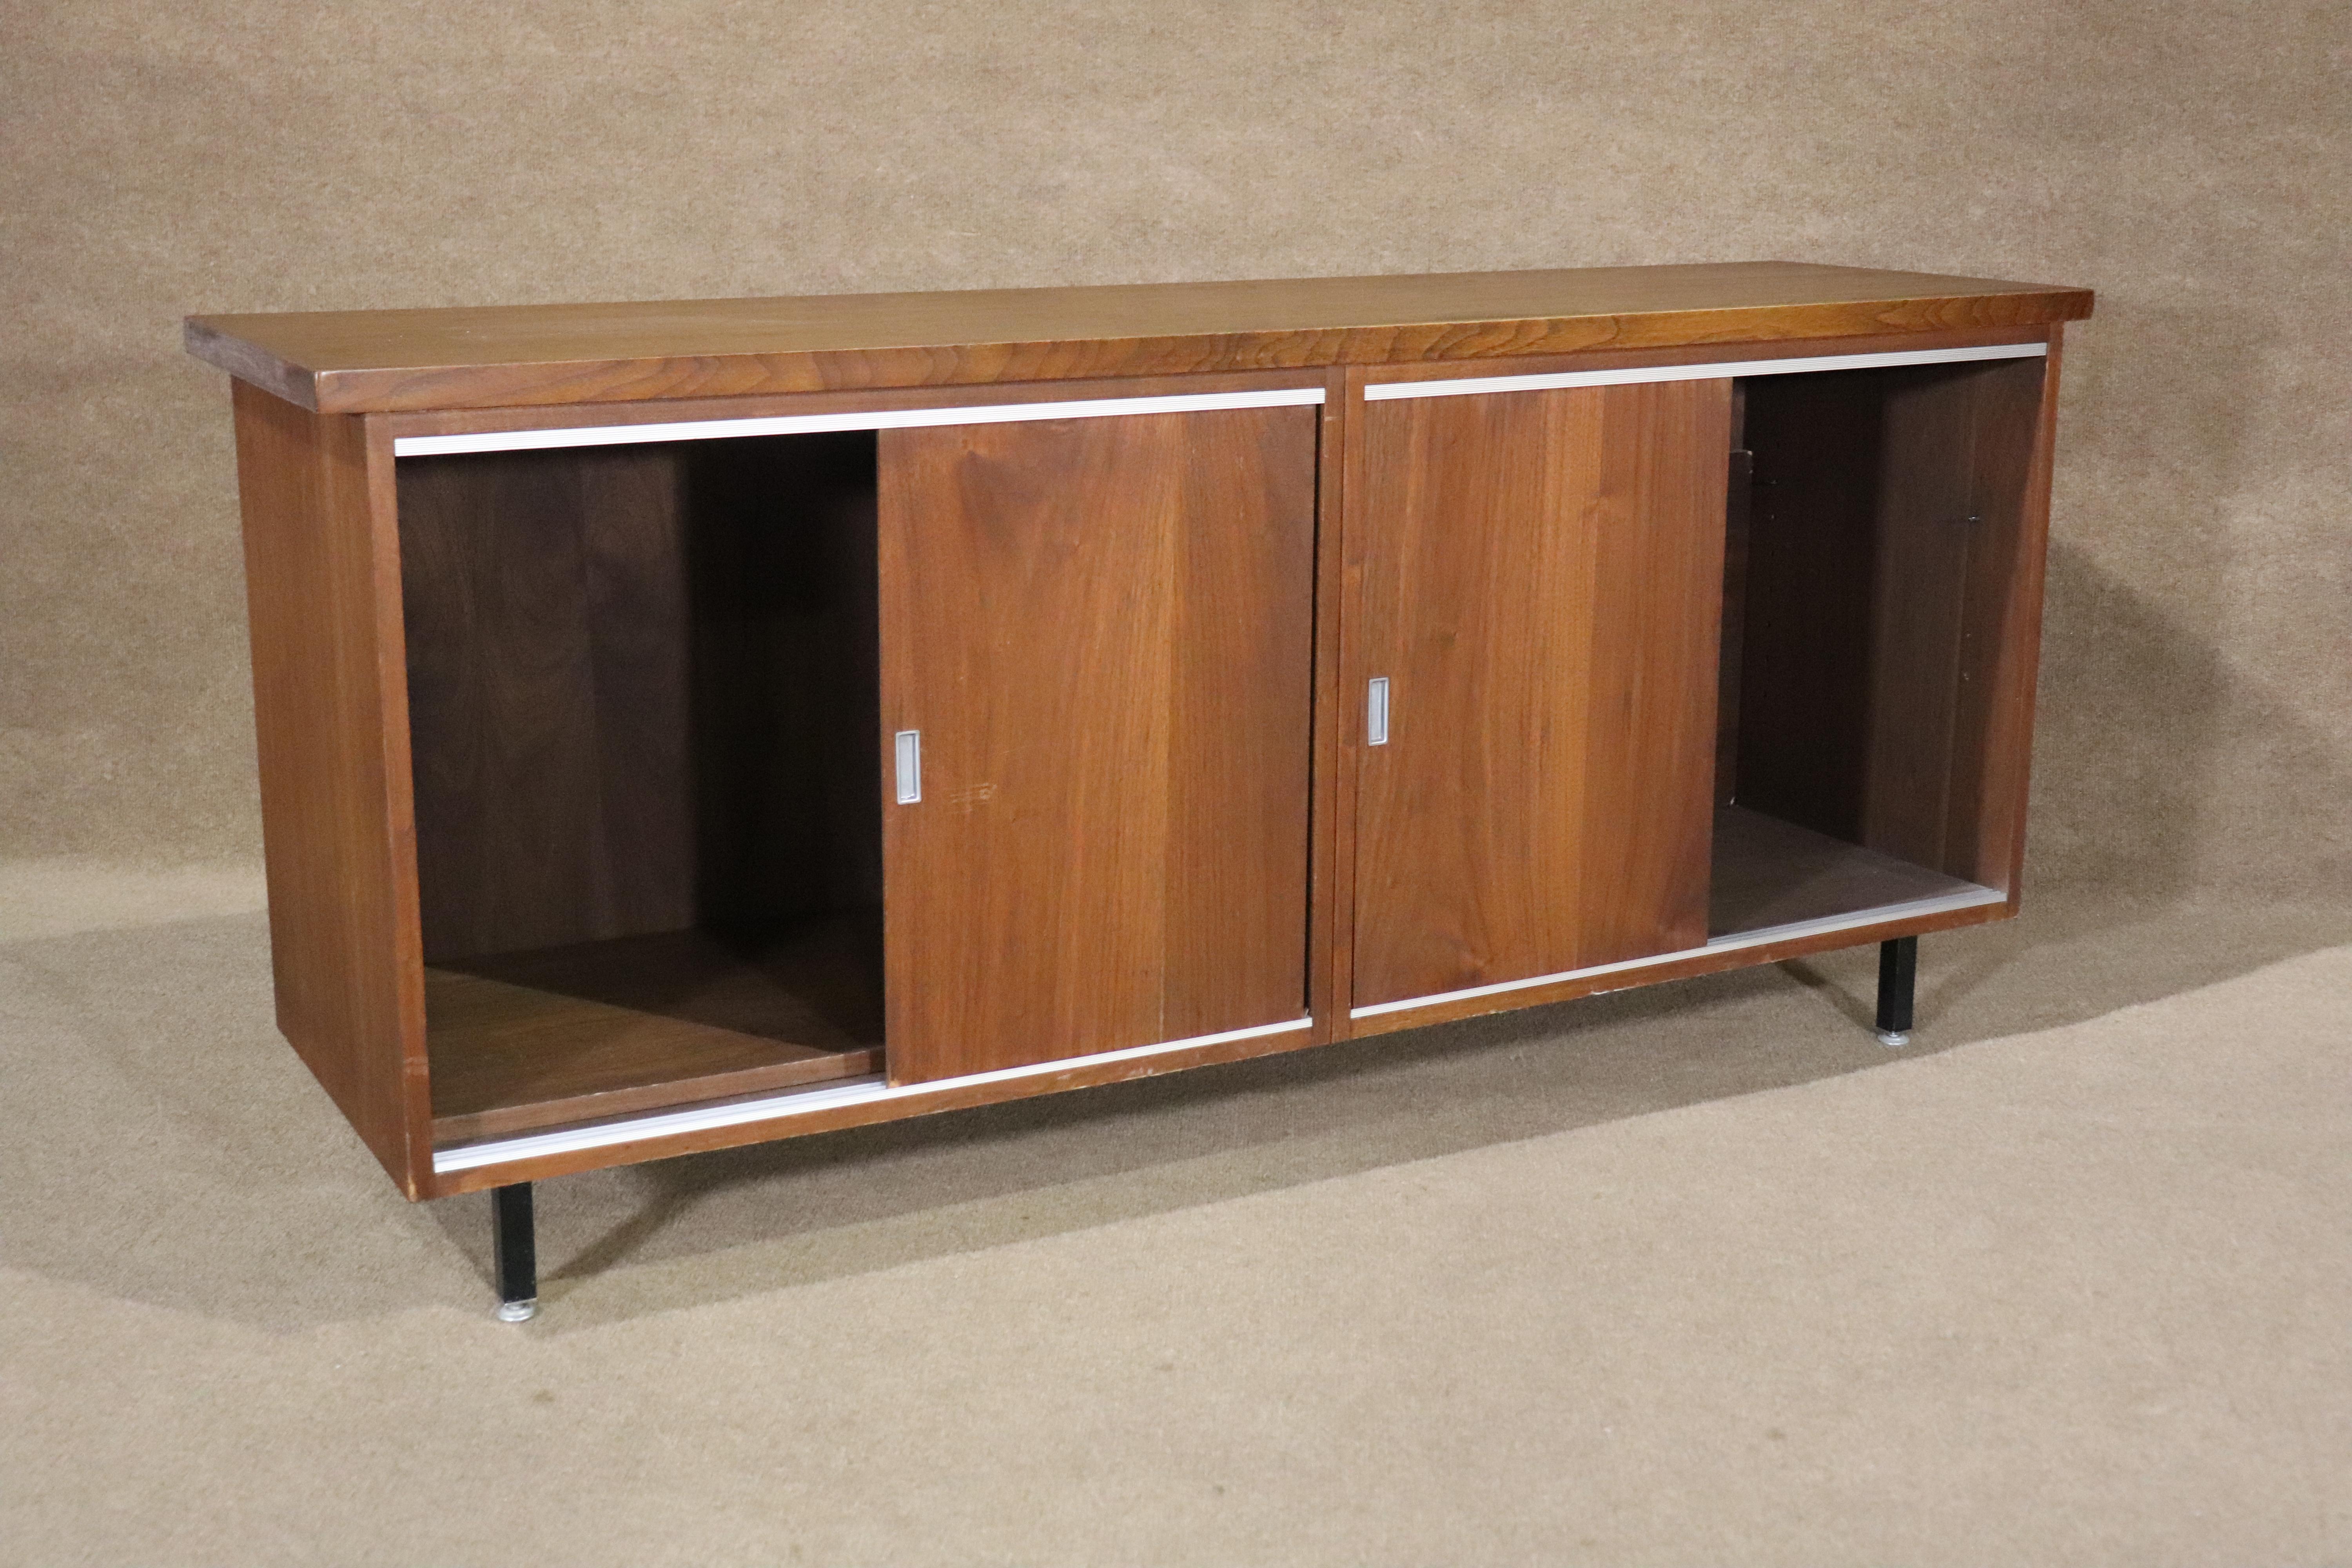 Long mid-century modern office cabinet in walnut wood grain with aluminum hardware and matching runners. Sliding doors reveal two large cabinets with shelf capability. Great for your modern home or office use.
Please confirm location NY or NJ